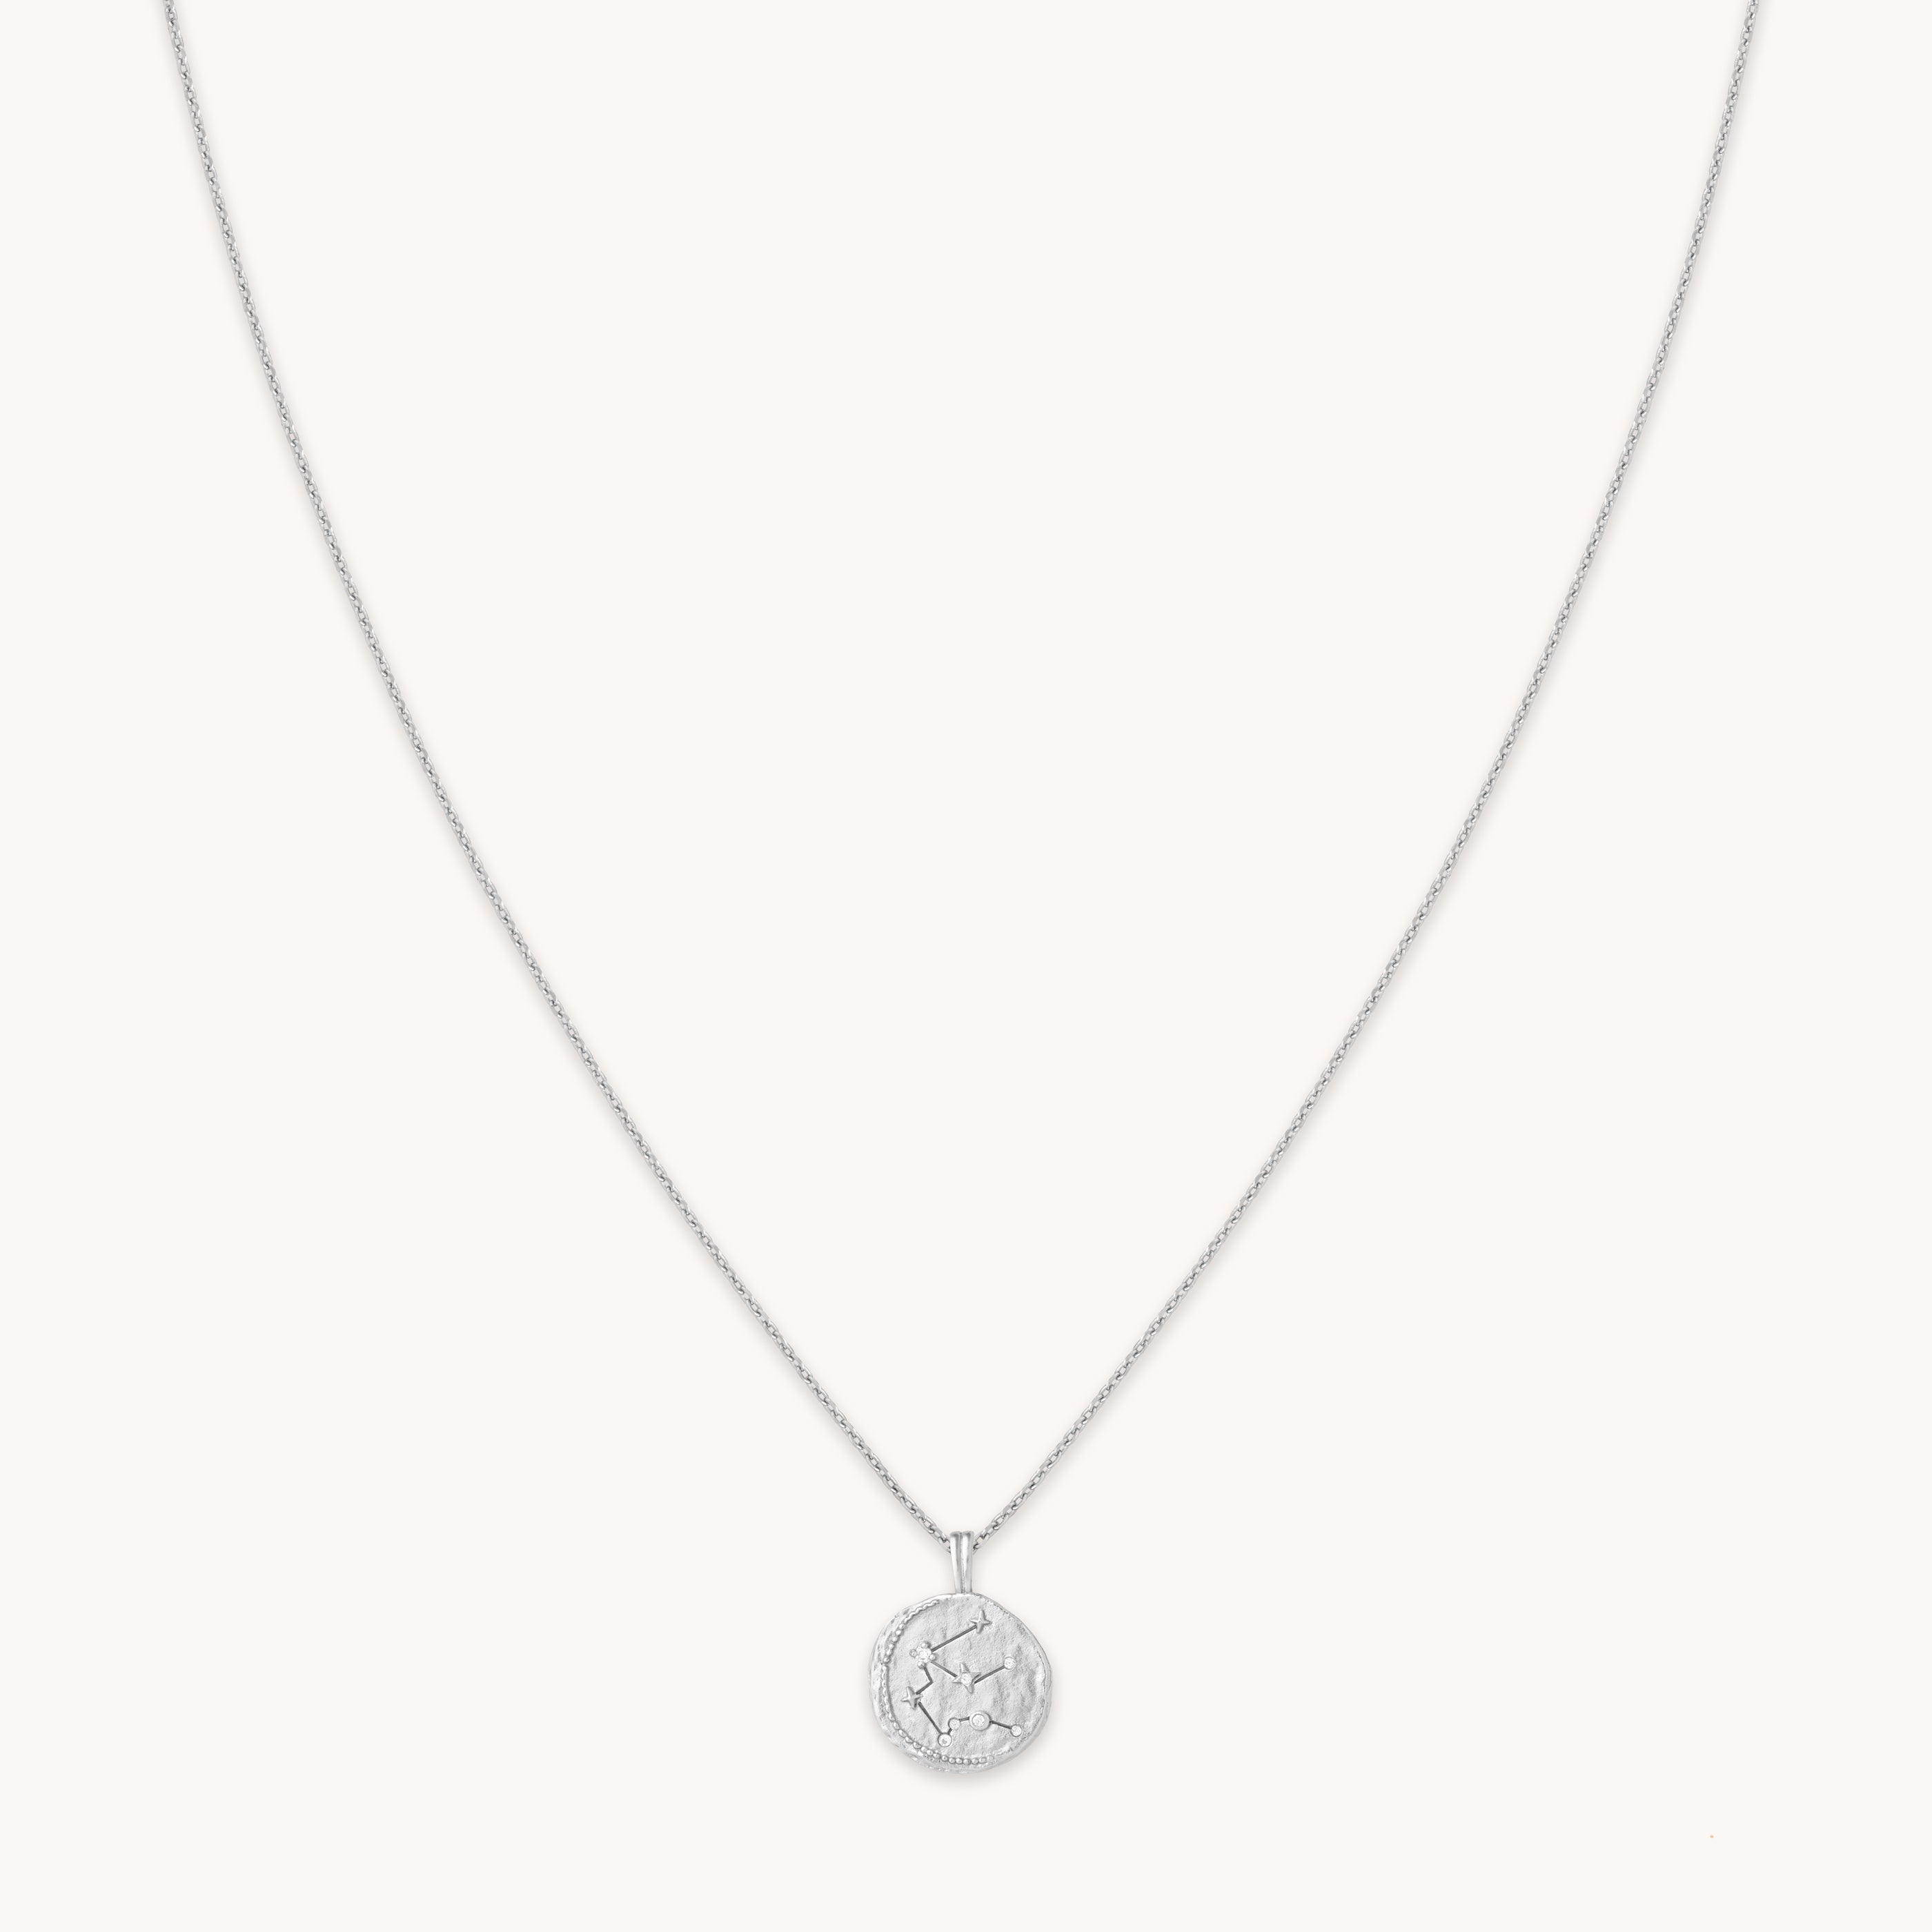 Diamond Accent Aquarius Zodiac Disc Necklace in Sterling Silver with 14K  Gold Plate - 18